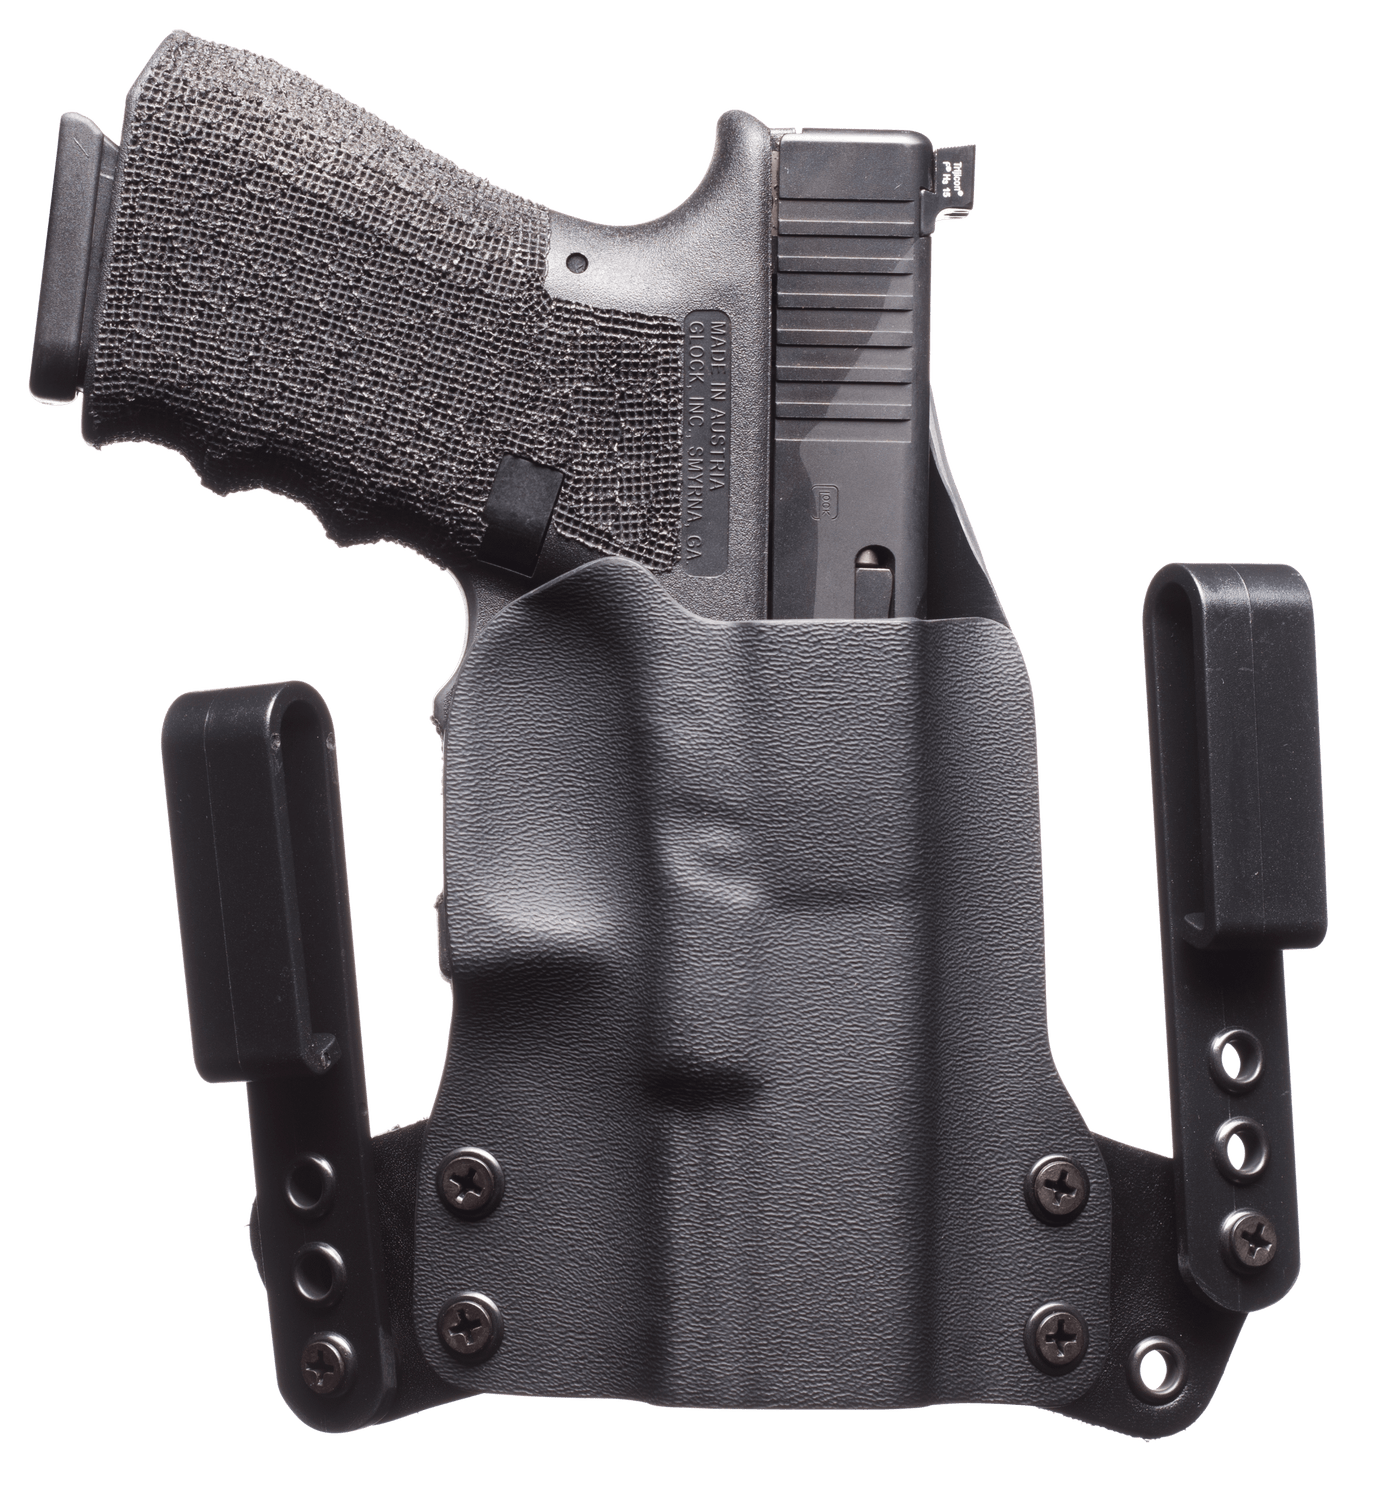 BlackPoint Tactical Blk Pnt Mini Wing For Glk 19 Rh Blk Holsters